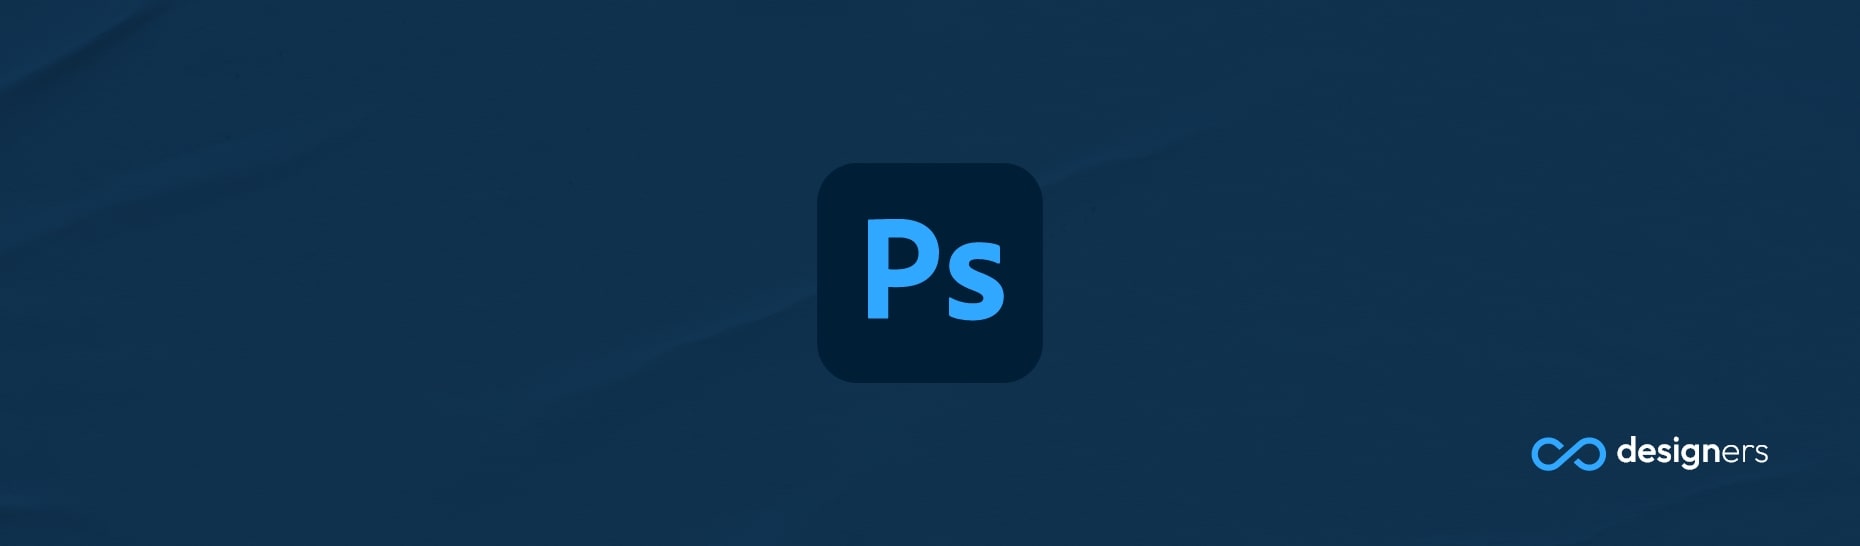 How Do I Save a Photoshop File With a Transparent Background?